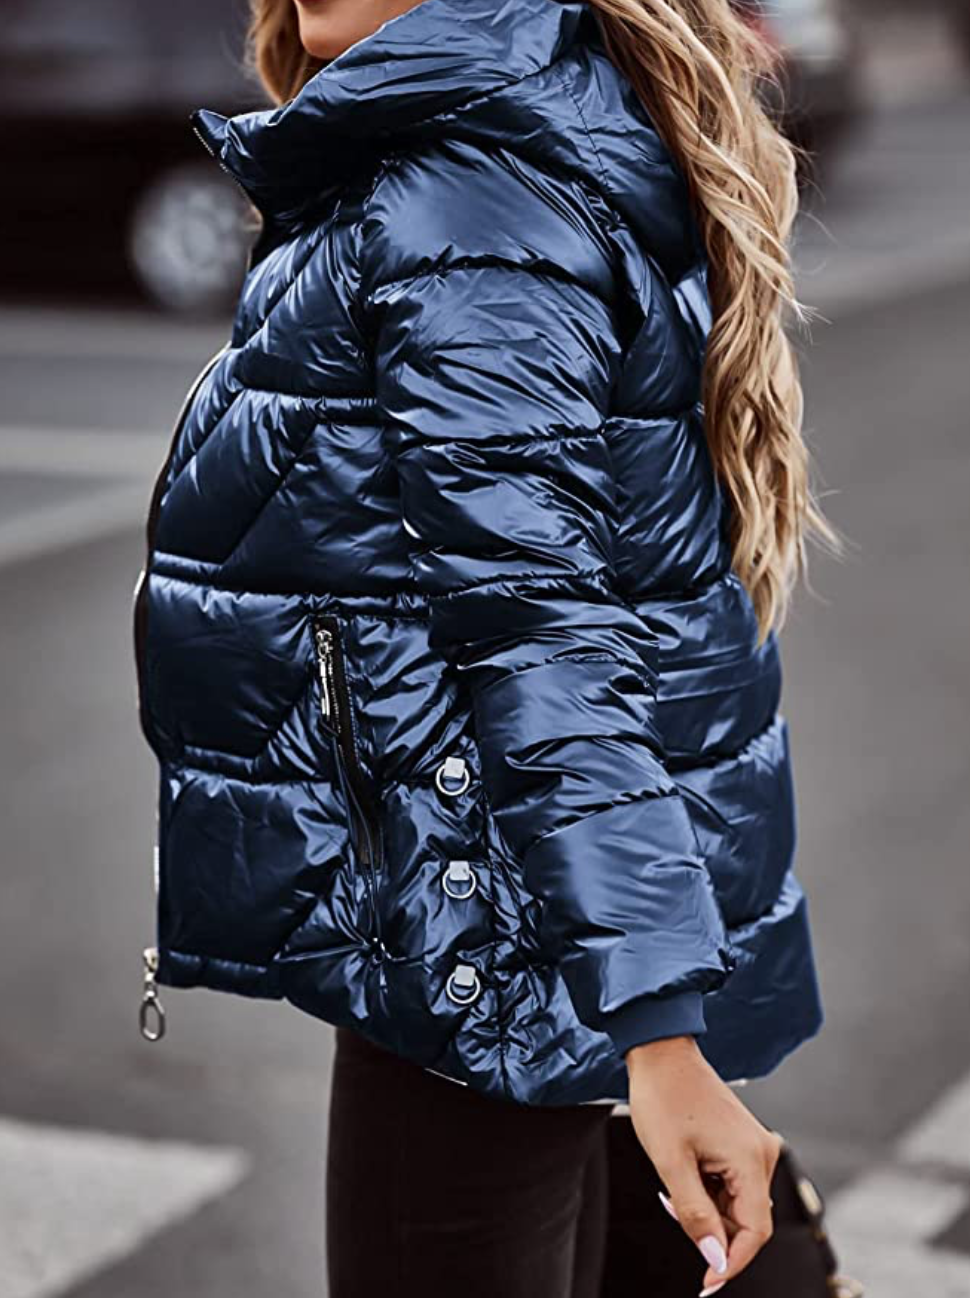 pufferjacket by Zwurew Amazon?width=1024&height=1024&fit=cover&auto=webp